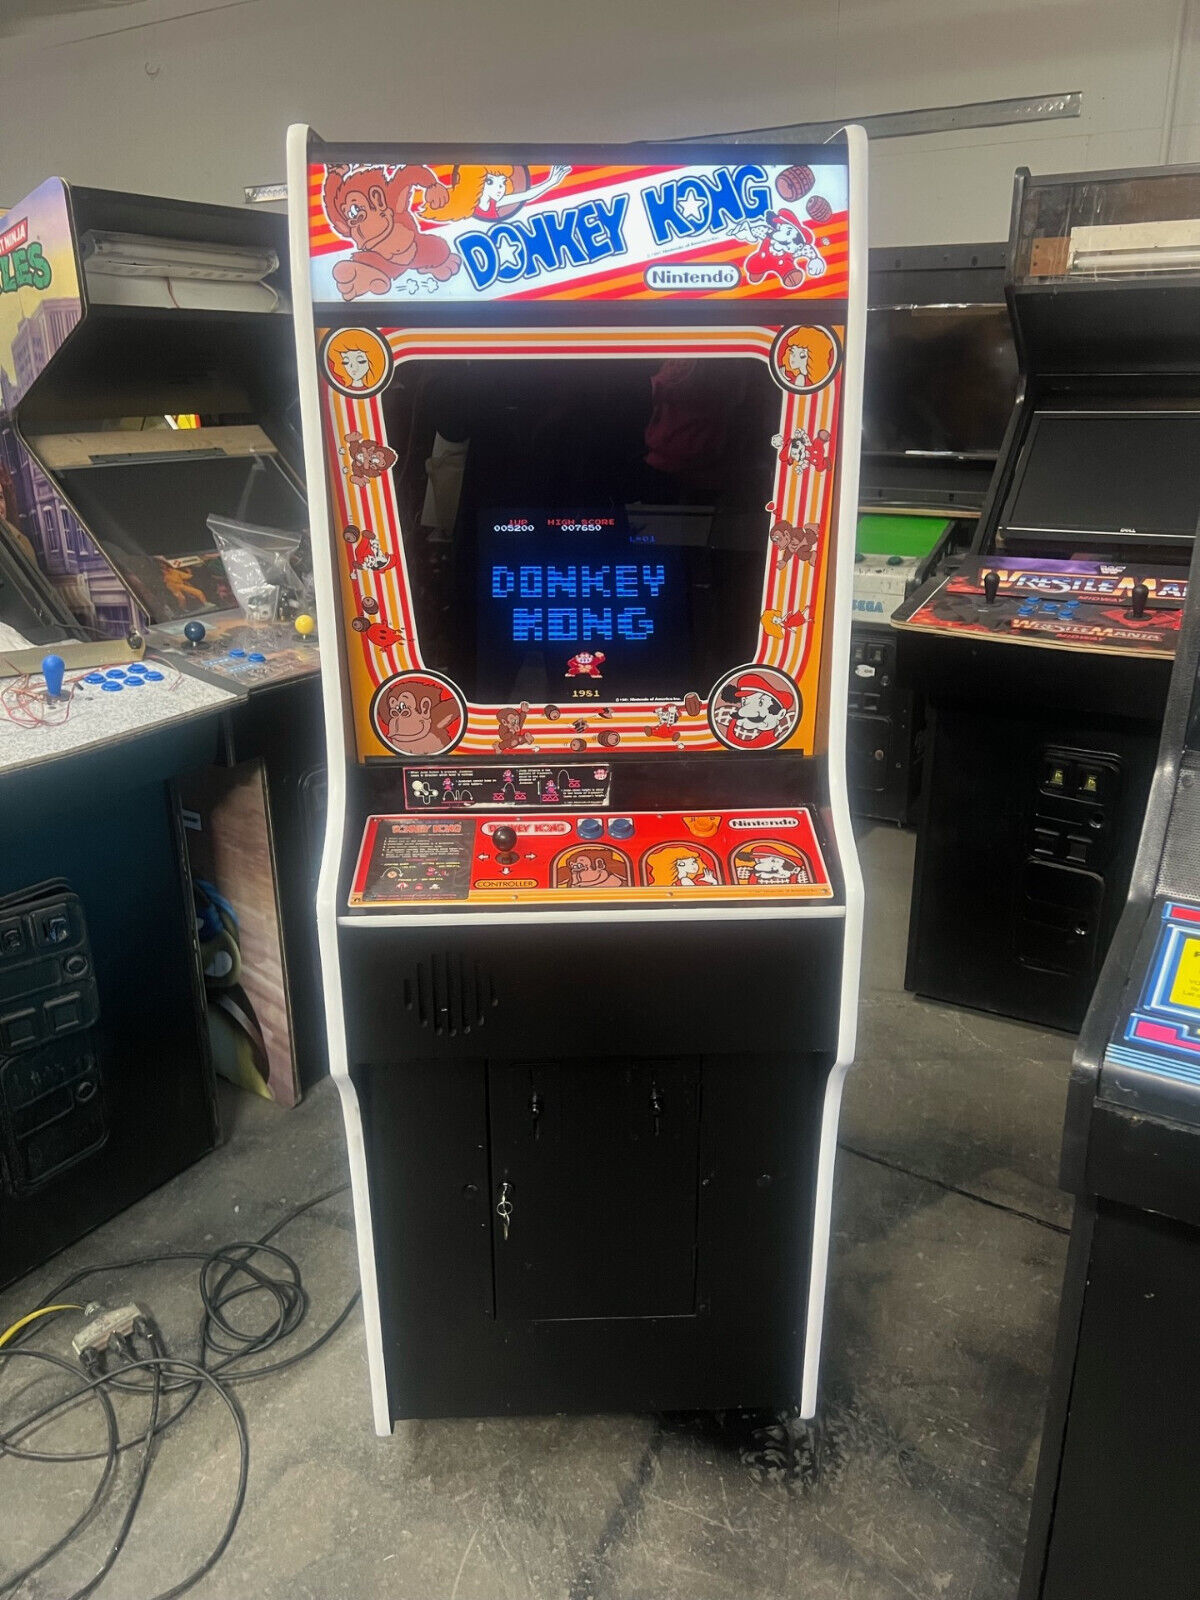 DONKEY KONG ARCADE MACHINE by NINTENDO 1981 (Excellent Condition) *RARE*